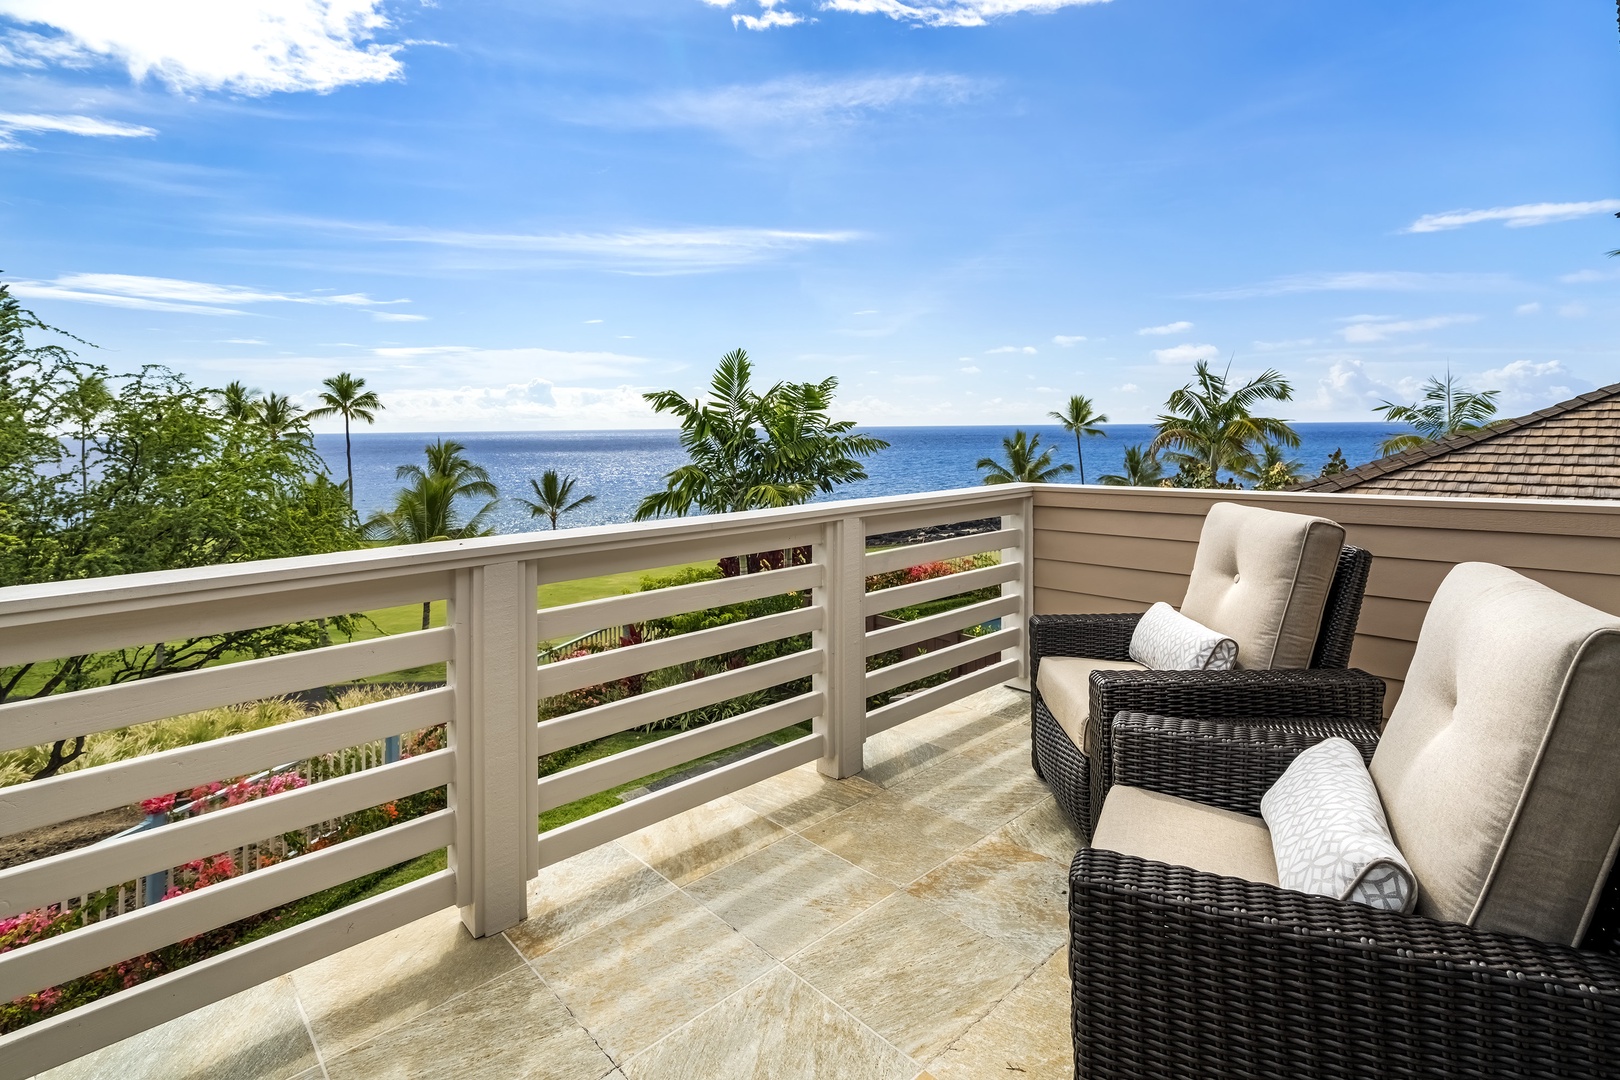 Kailua Kona Vacation Rentals, Green/Blue Combo - Primary bedroom Lanai with gorgeous views!